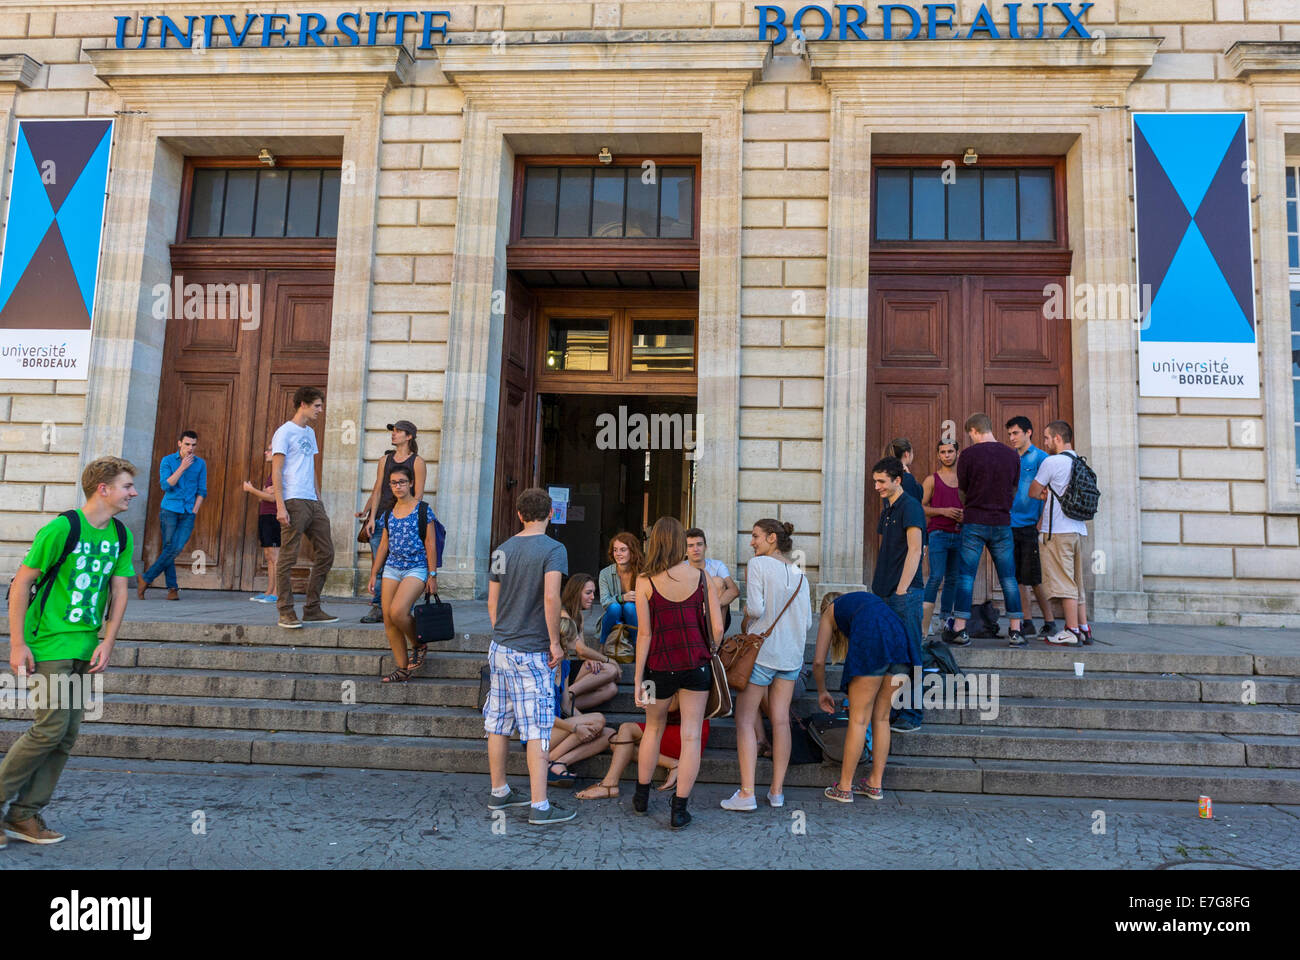 Bordeaux, France, Street Scenes, University Students Hanging Out, waiting, Building at 'Bordeaux University' crowd teenagers talking outside Stock Photo